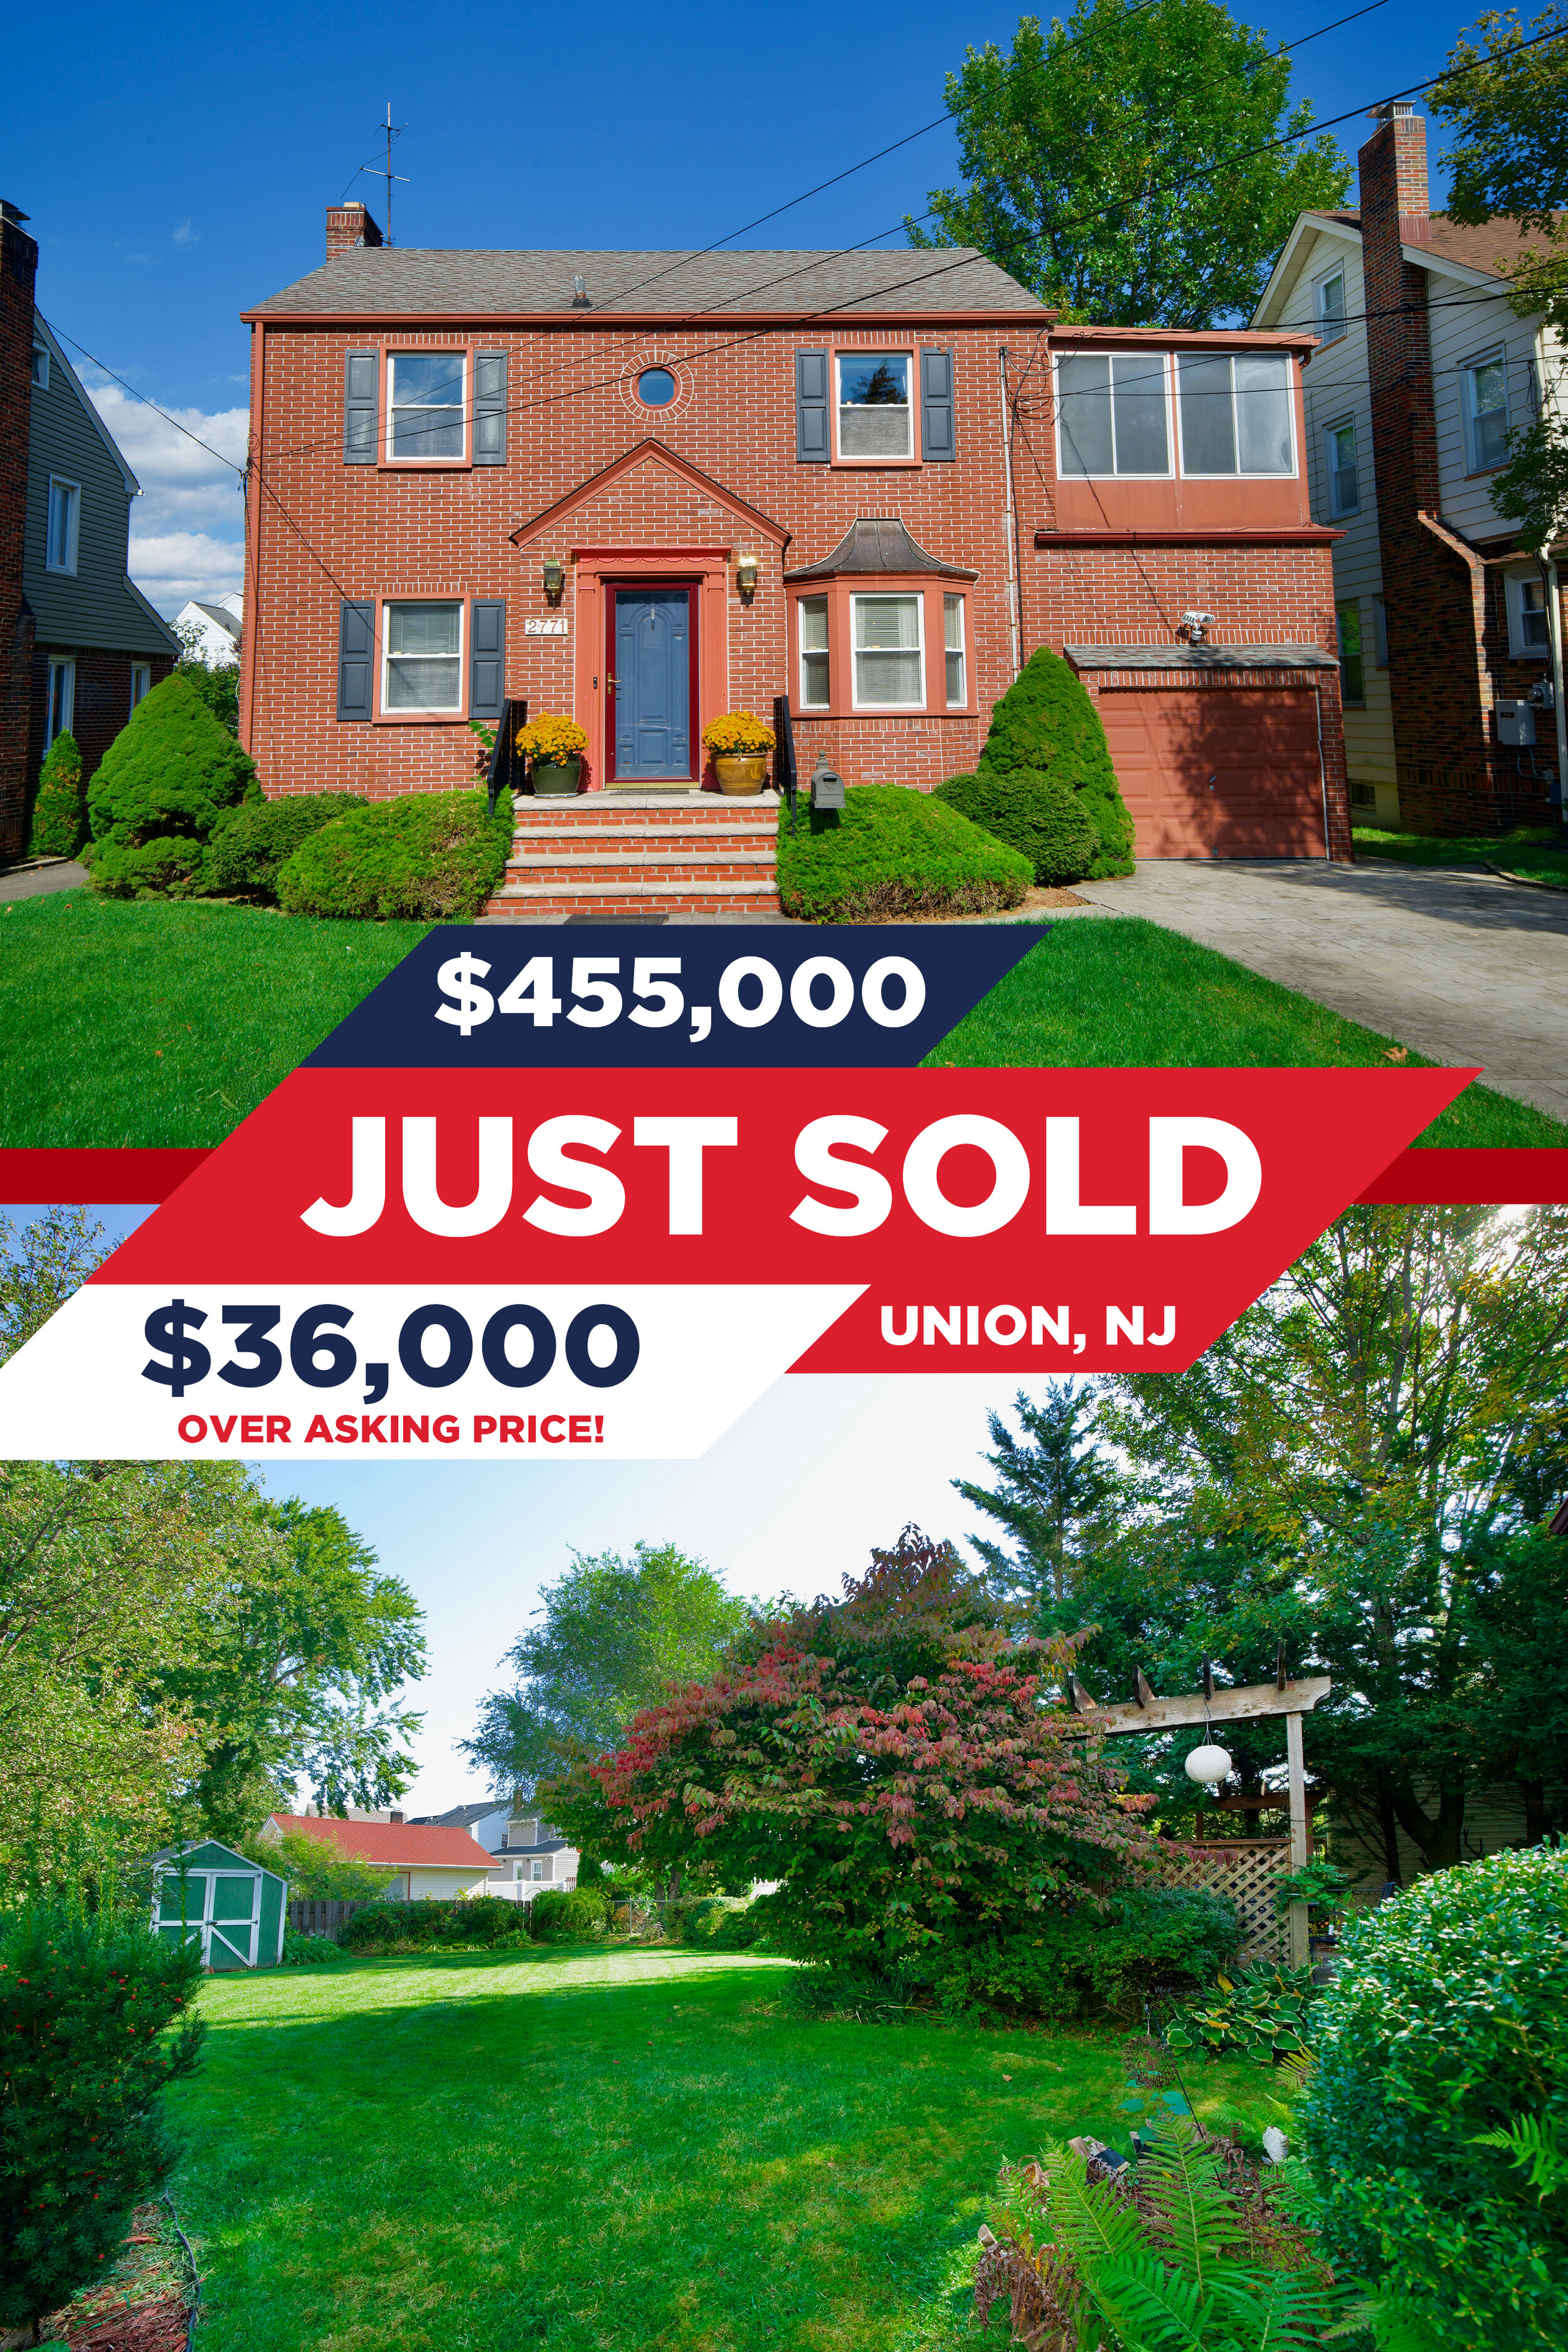 Larchmont Road in Union NJ Sold - Cat Gomes Sells Homes